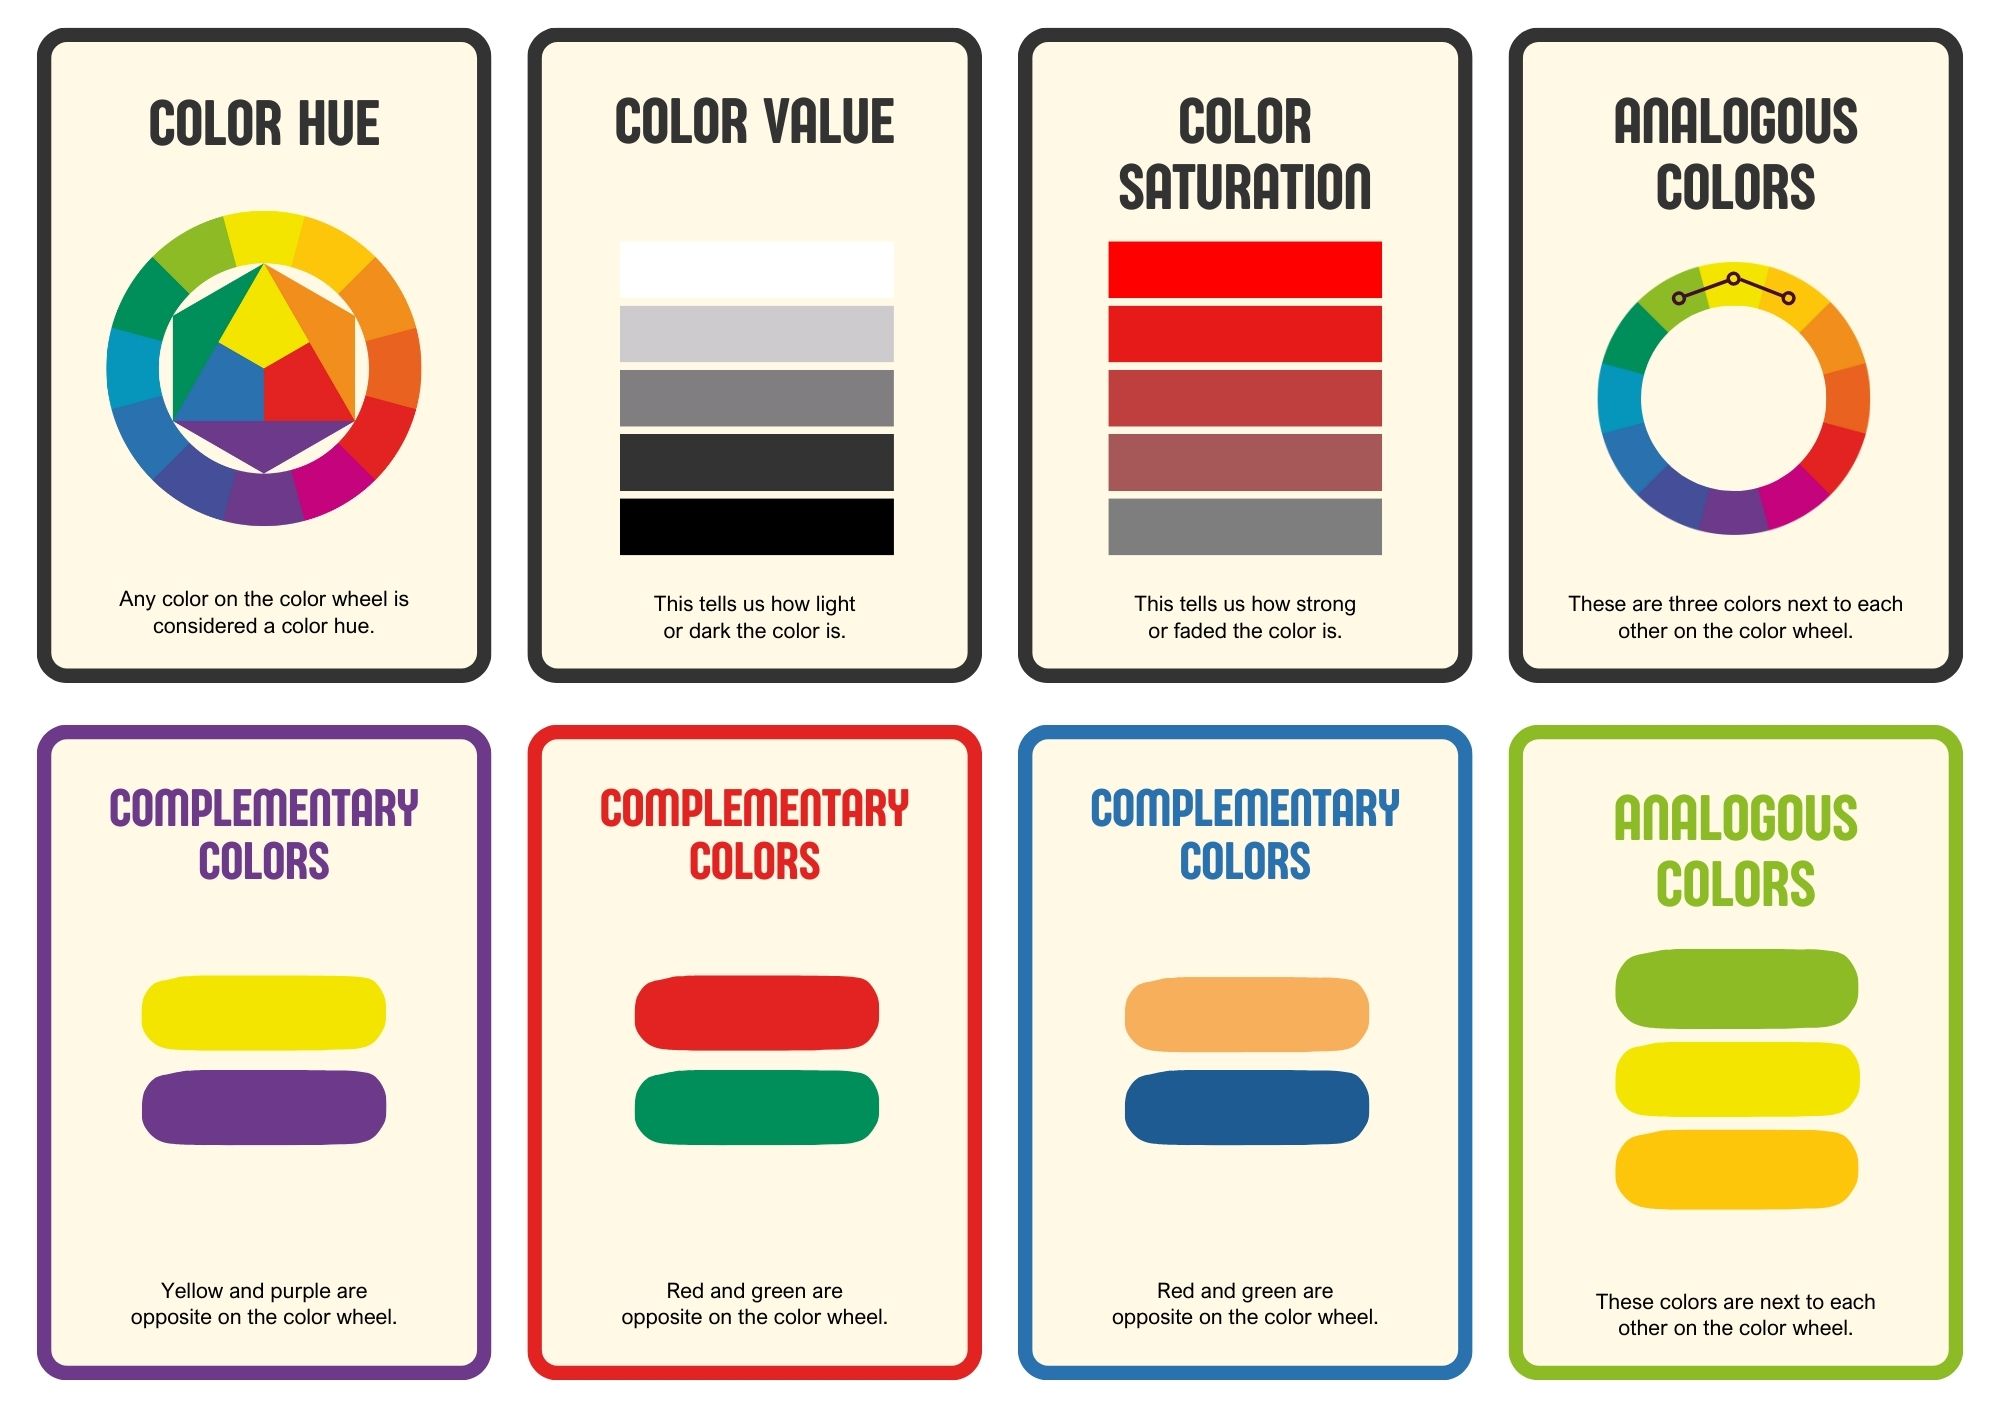 A set of educational cards illustrating basic color theory concepts including hue, value, saturation, and color harmony with examples.